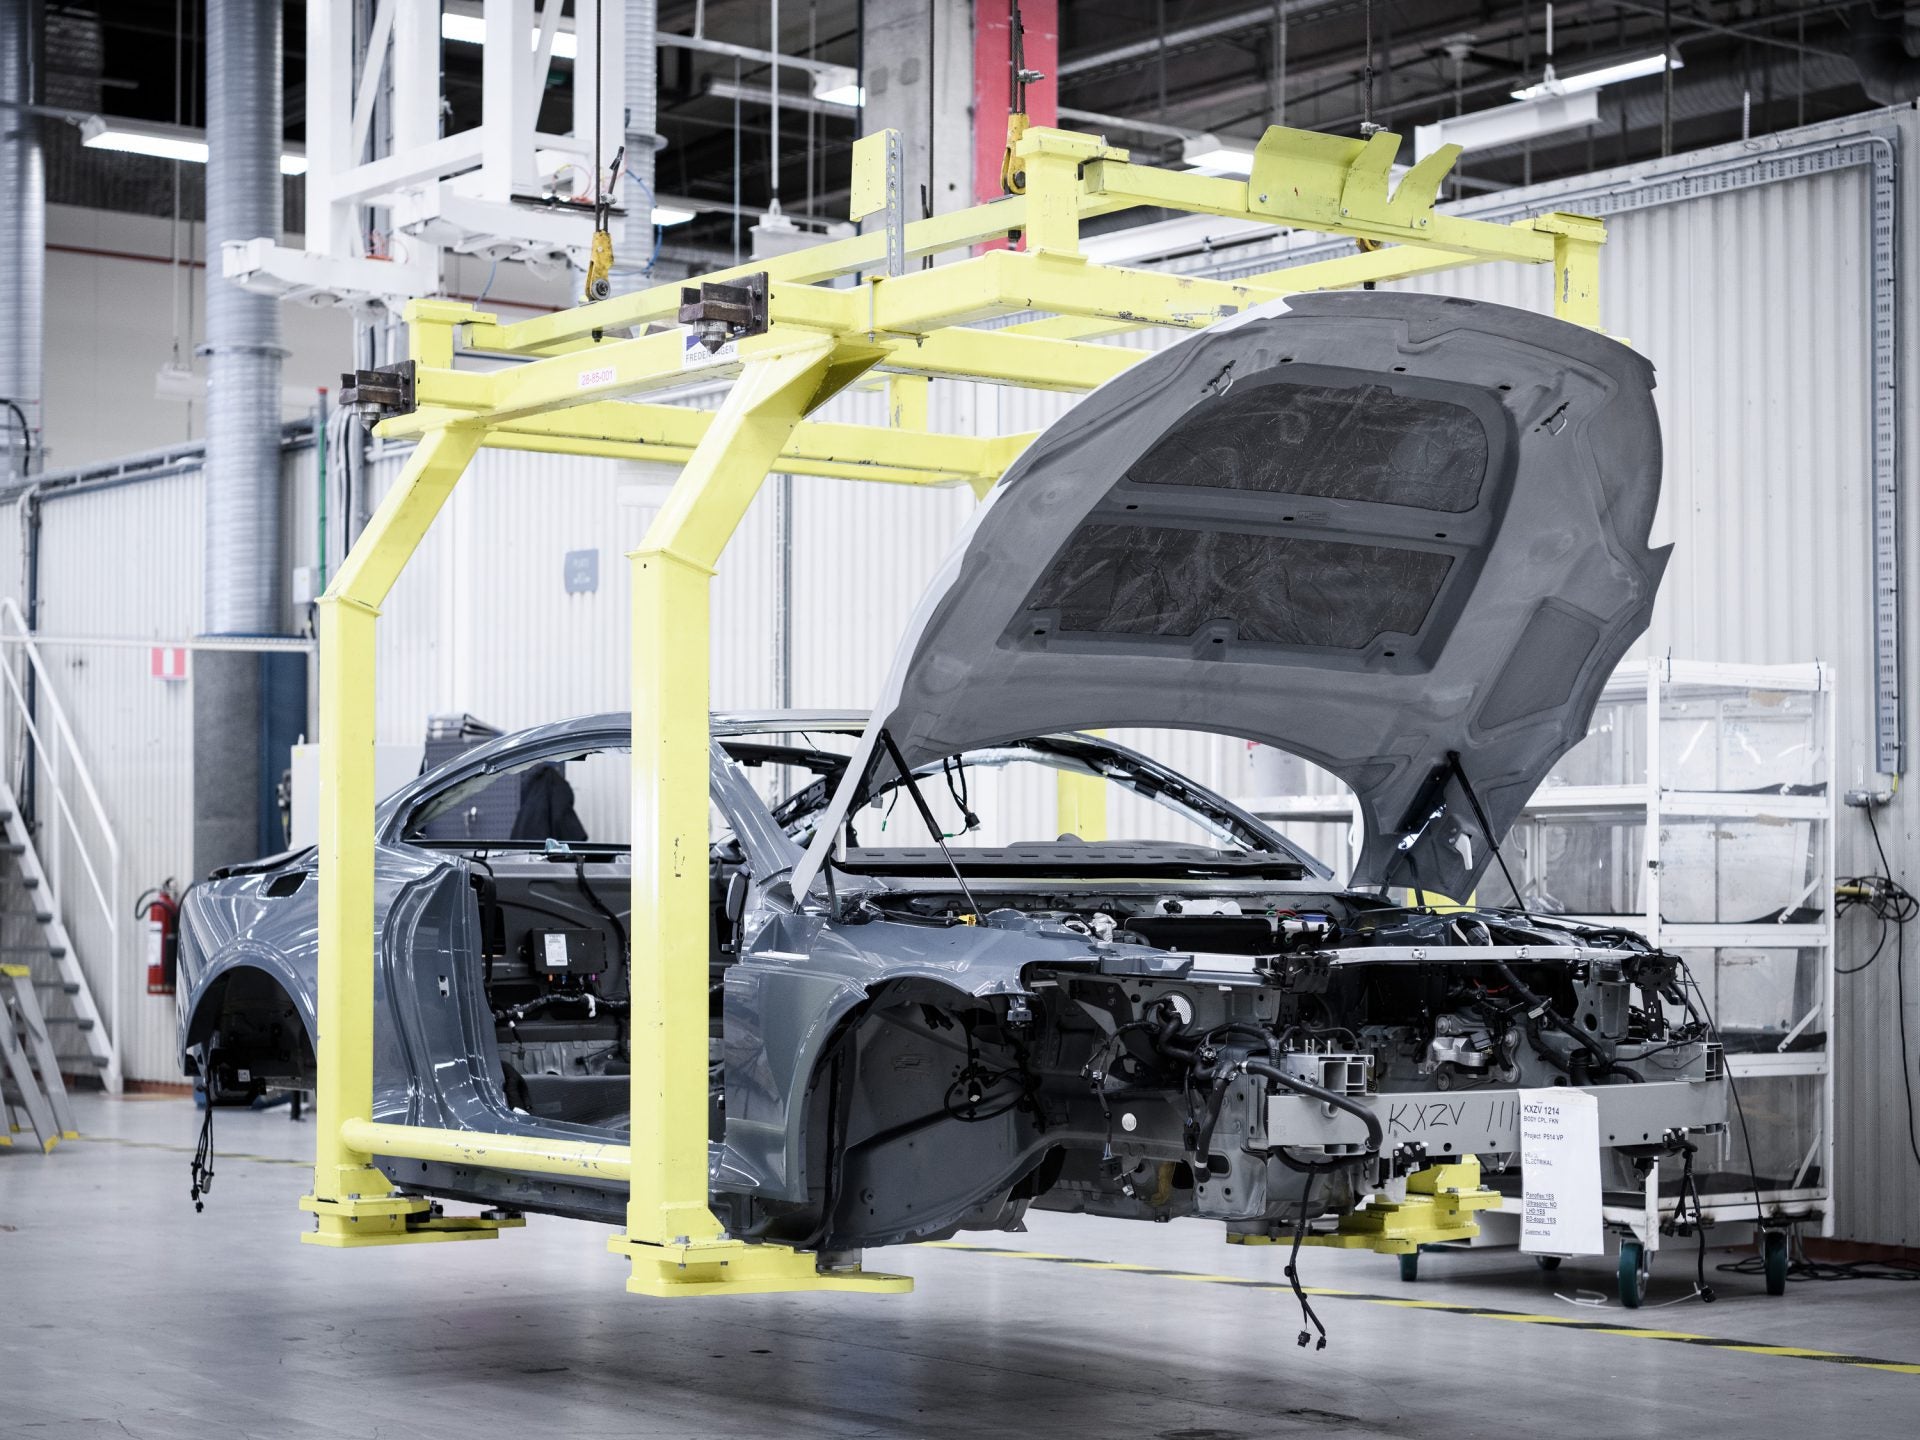 Polestar Is Building Its First Prototype Cars in Sweden